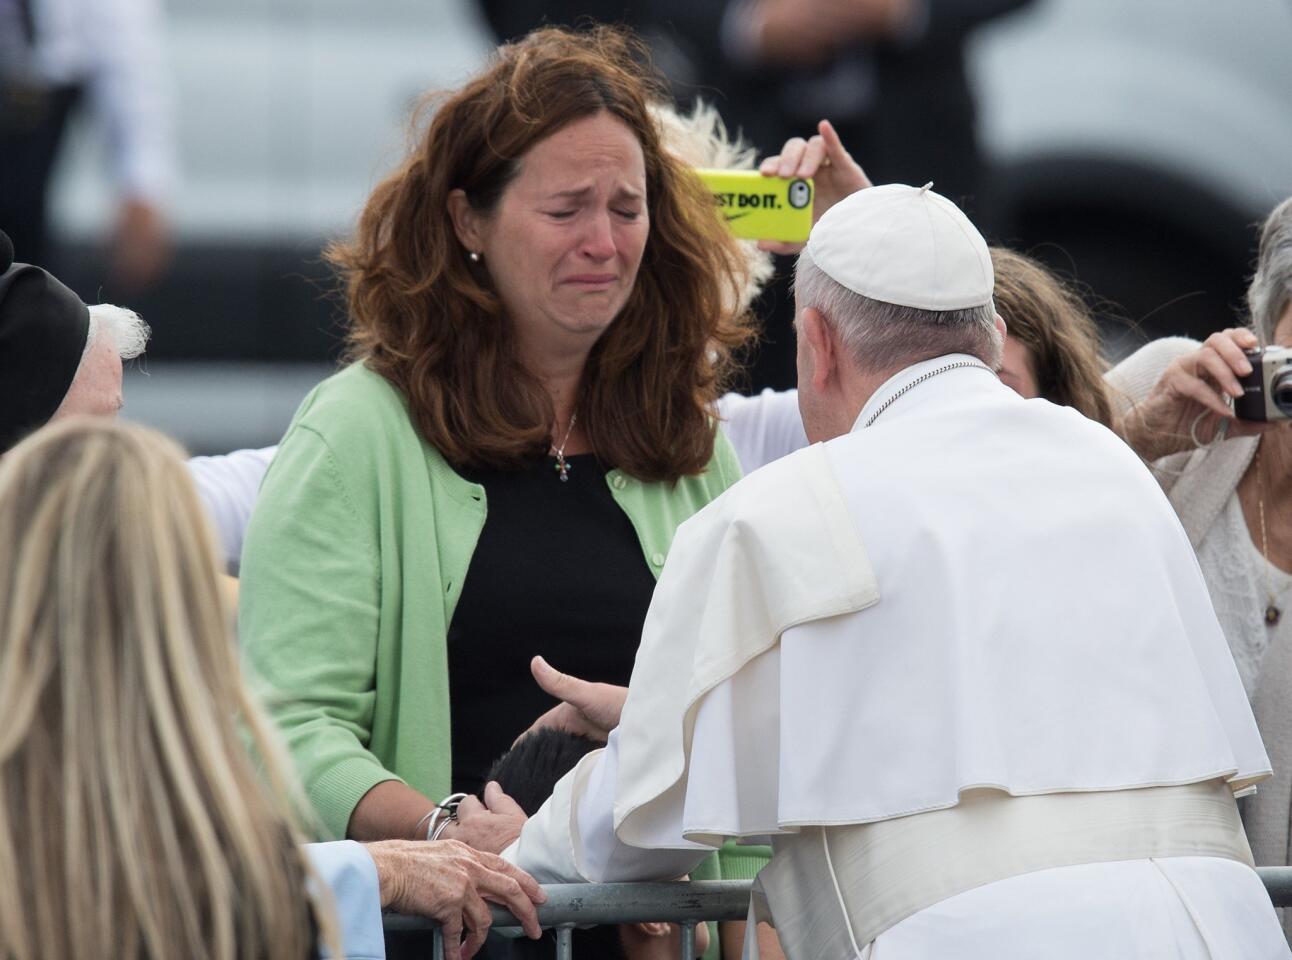 A woman cries as Pope Francis blesses her disabled son upon arrival in Philadelphia on Sept. 26, 2015, on the final leg of his six-day visit to the U.S.